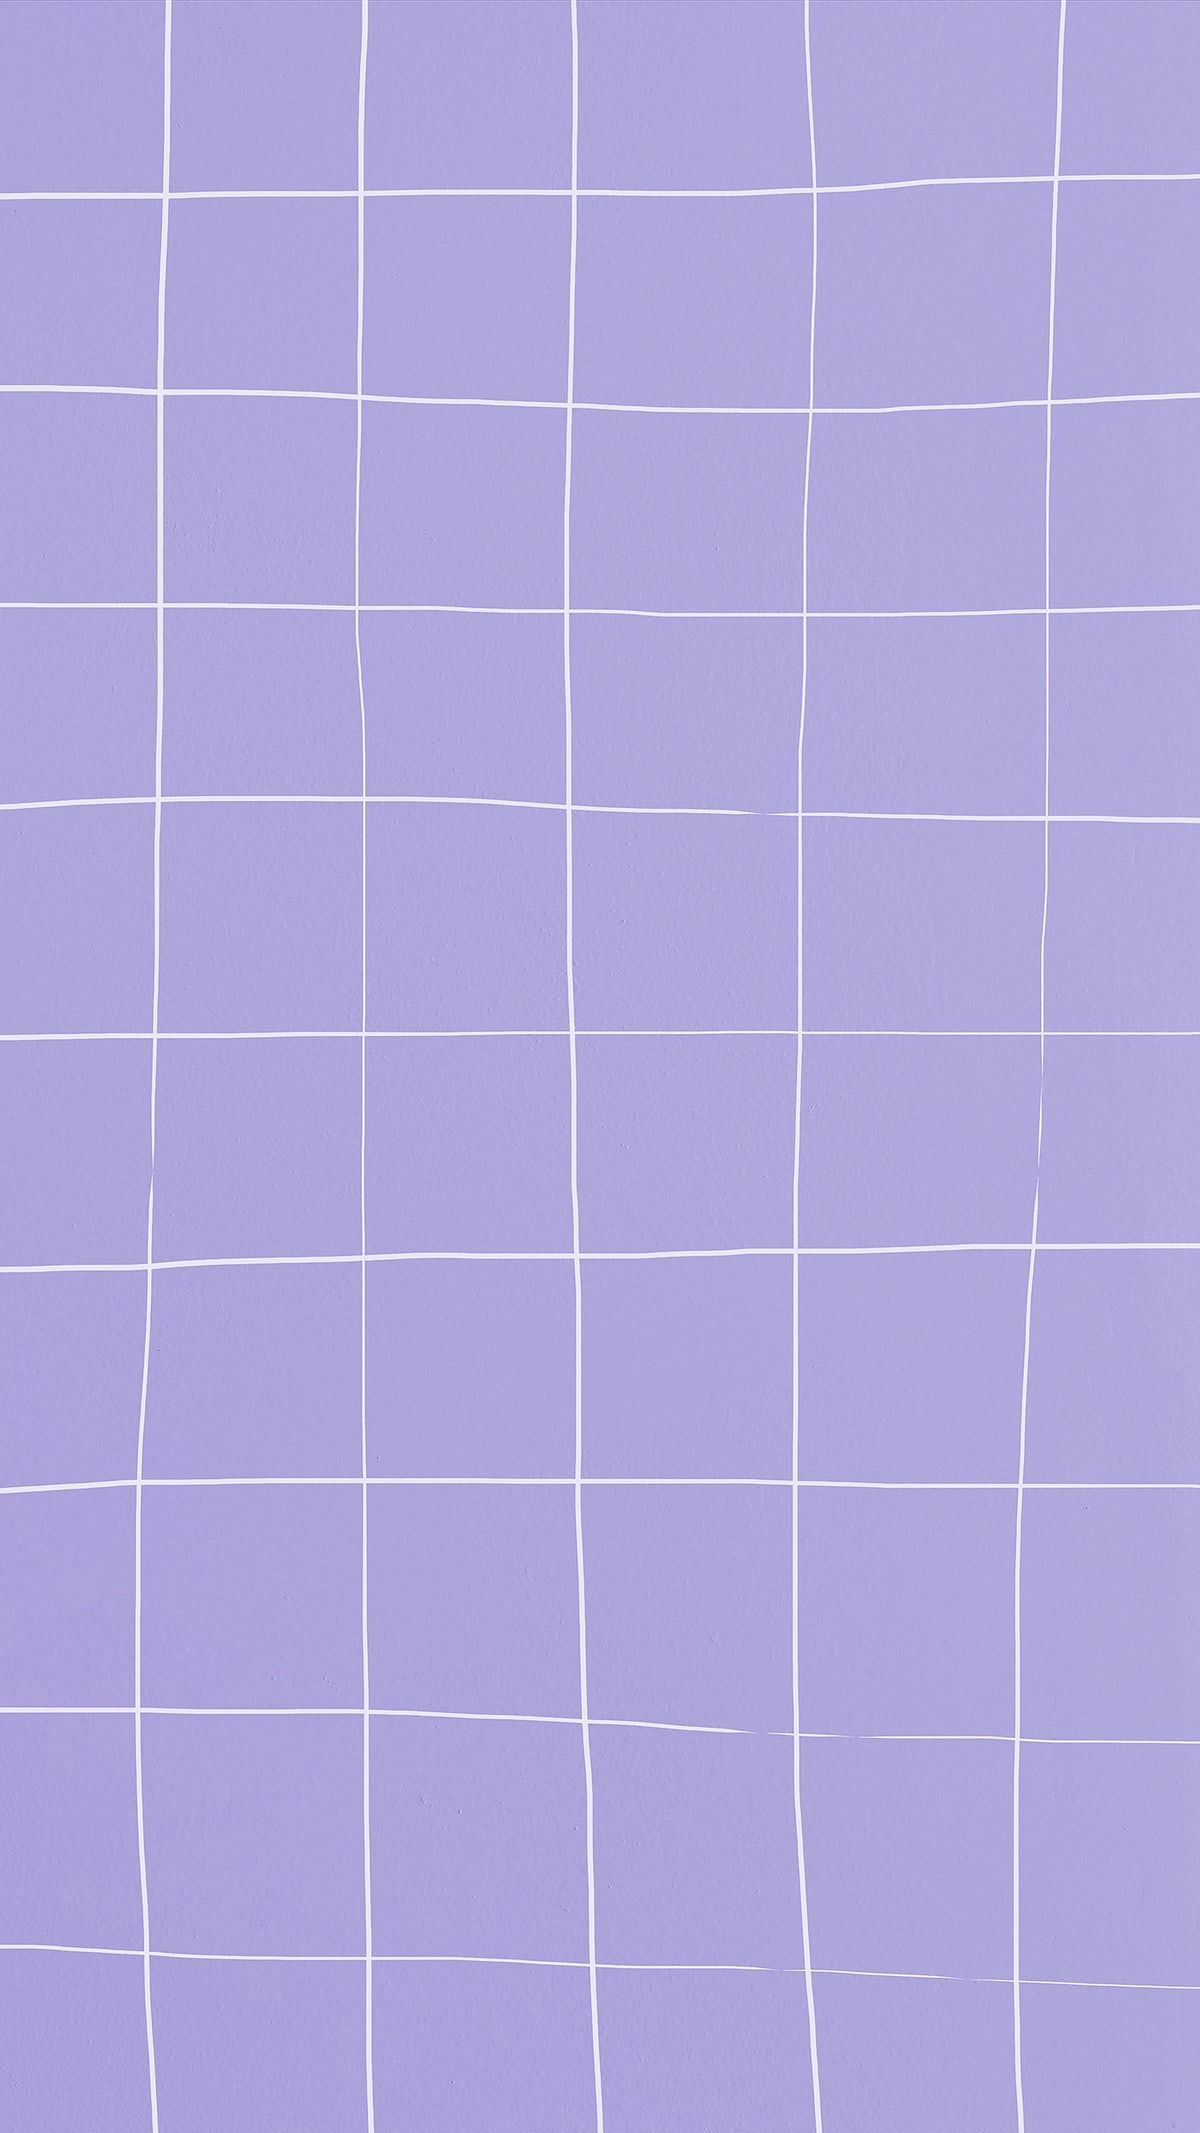 Download free illustration of Lilac tile wall texture background distorted by Chim about paper. Phone wallpaper patterns, Purple wallpaper iphone, Soft wallpaper